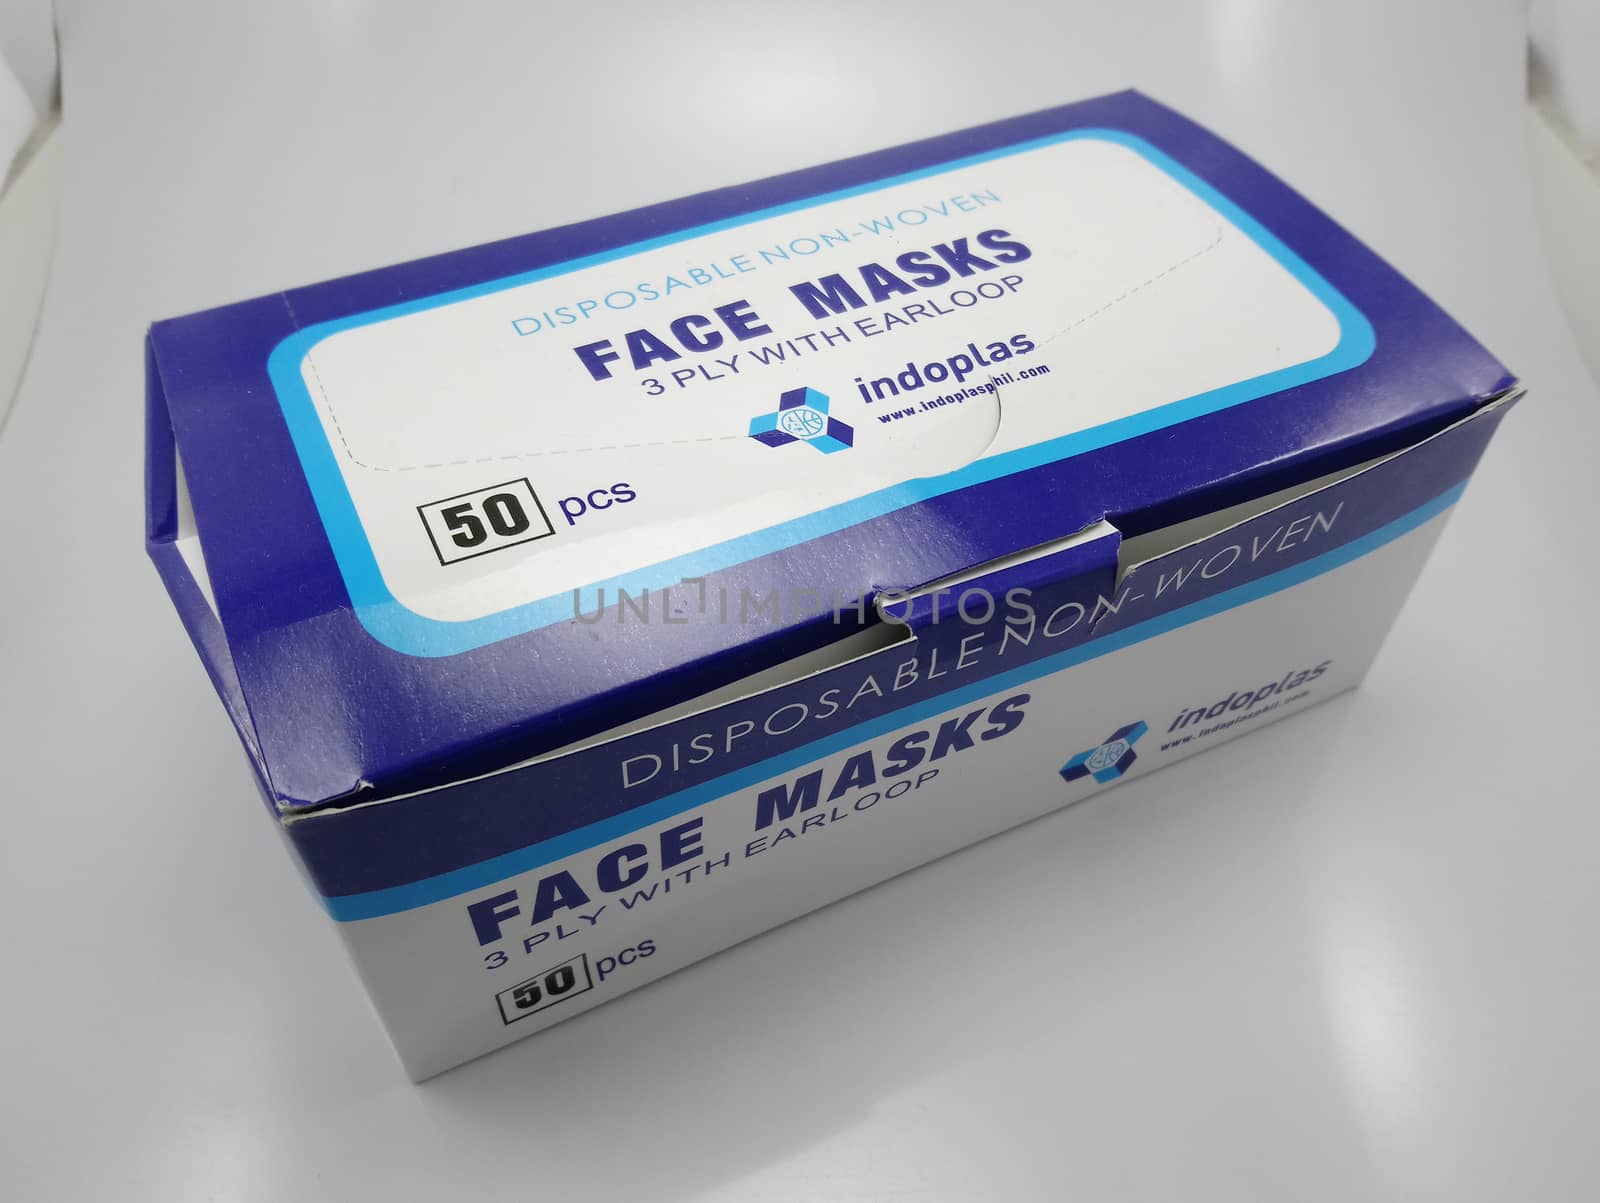 Indoplas disposable non woven face masks 3 ply with earloop in M by imwaltersy